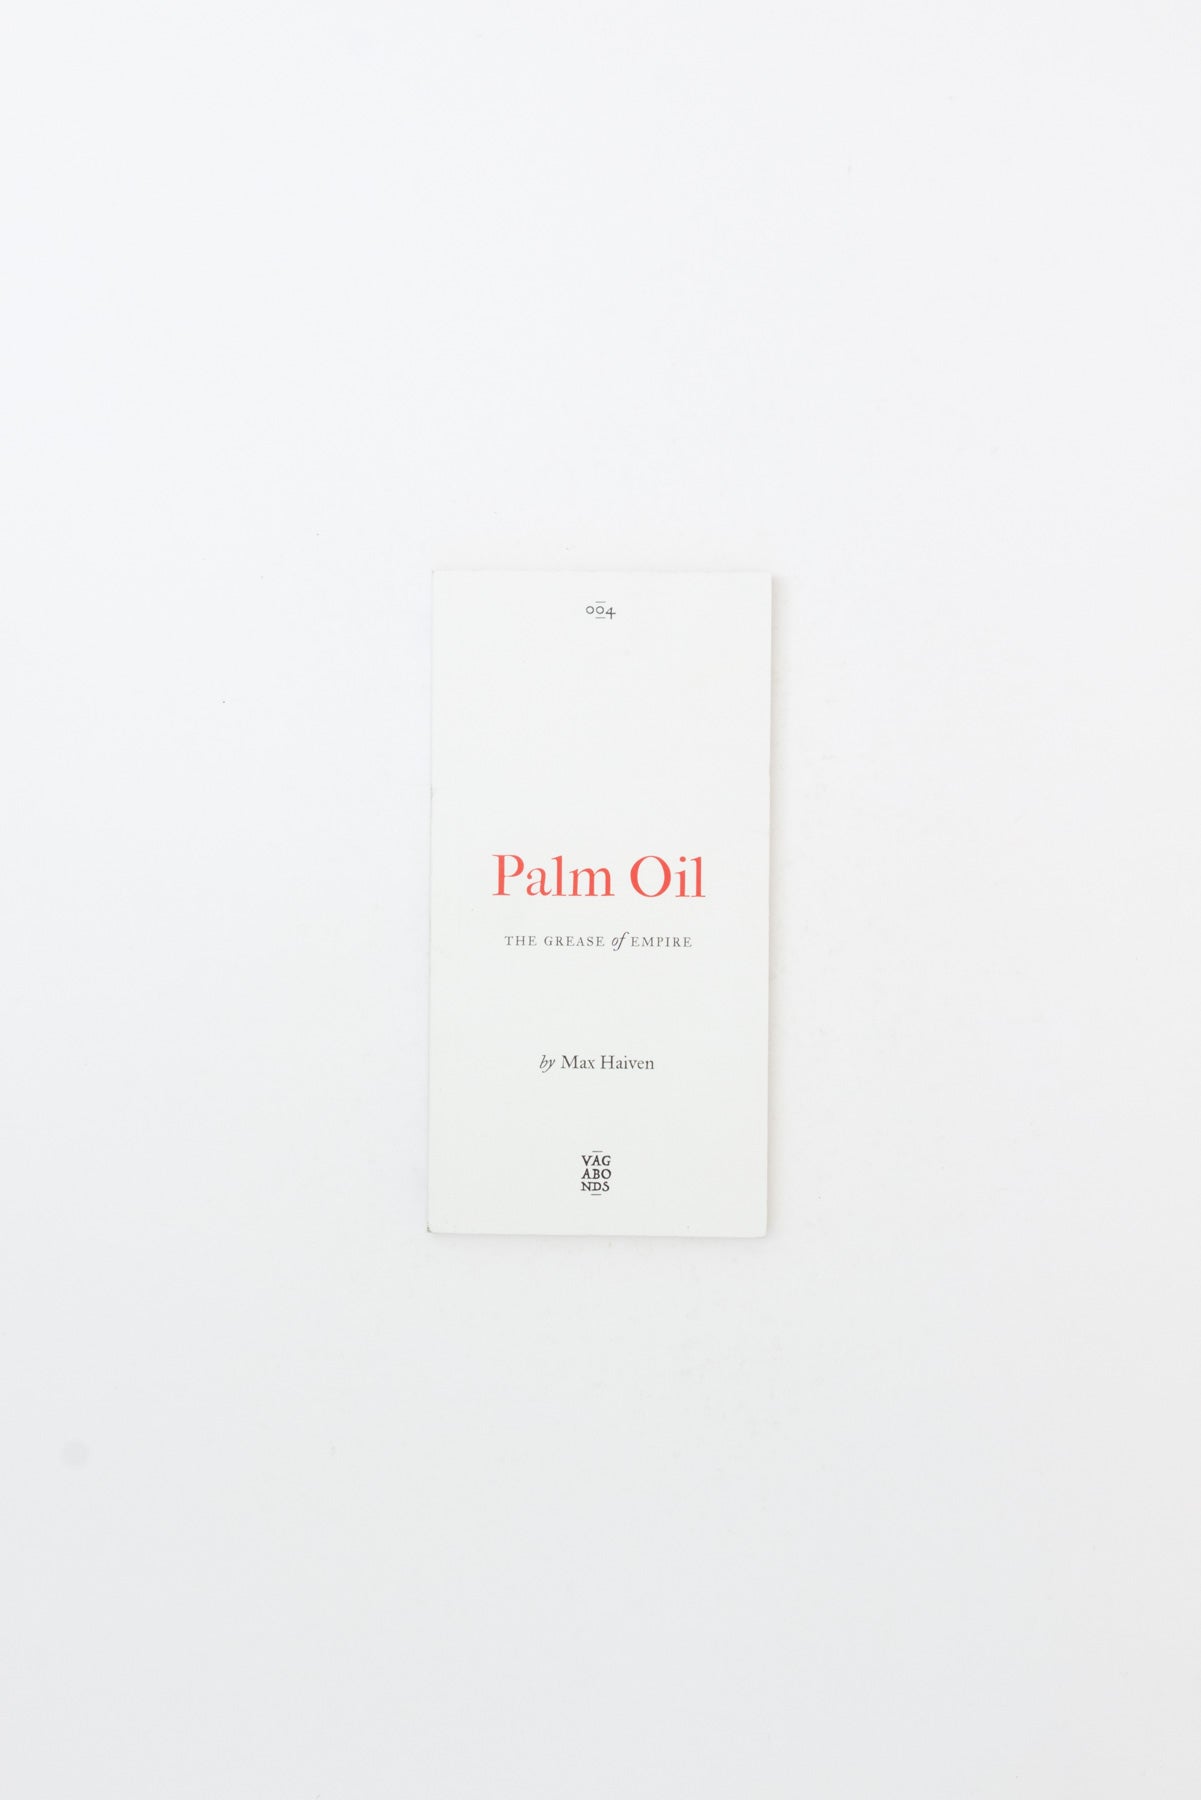 Palm Oil. The Grease of Empire. - Max Haiven